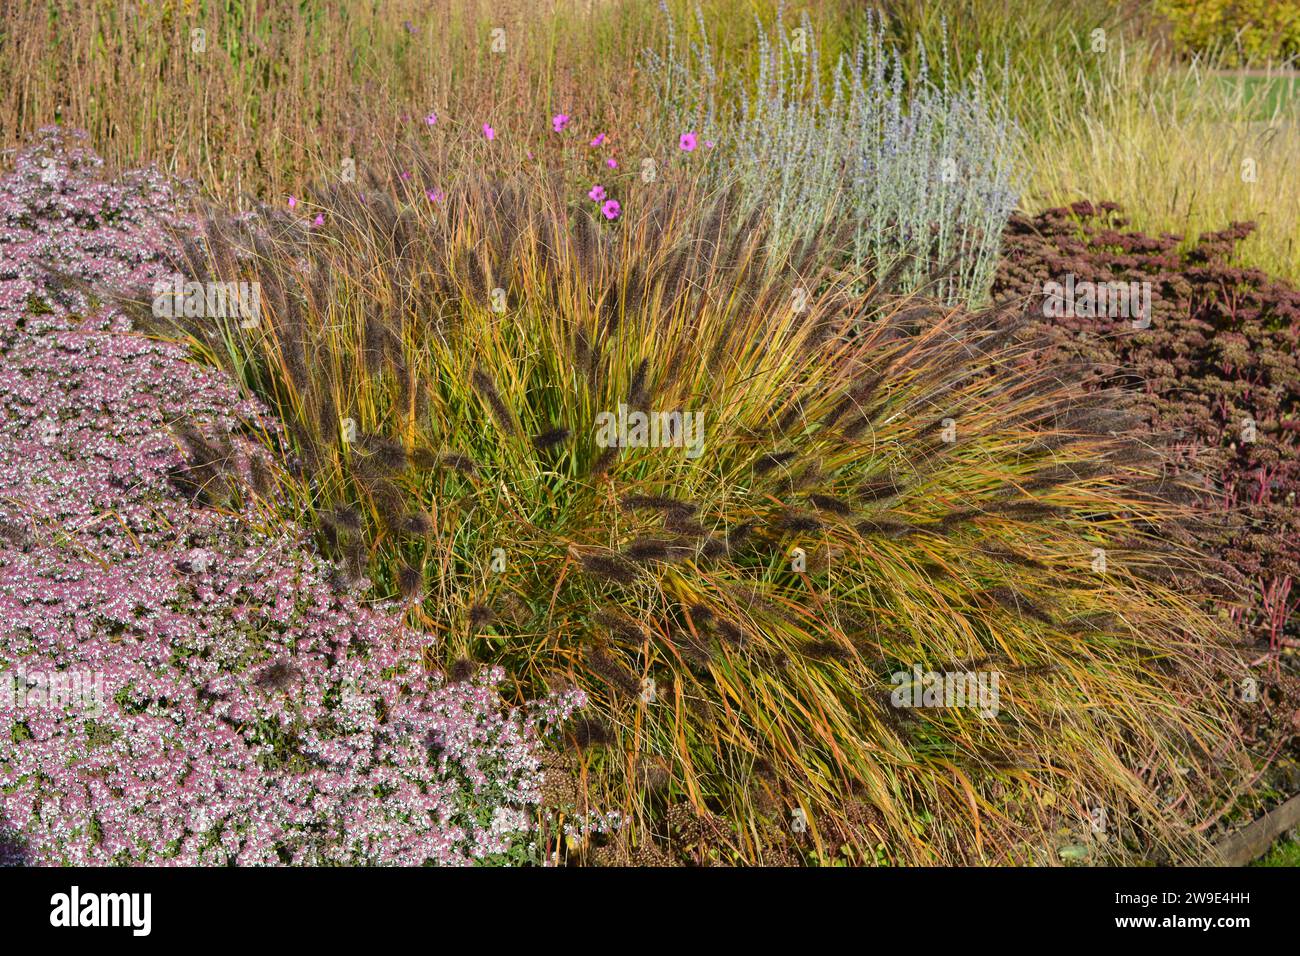 Ornamental flowering grasses in an autumn flowerbed Stock Photo